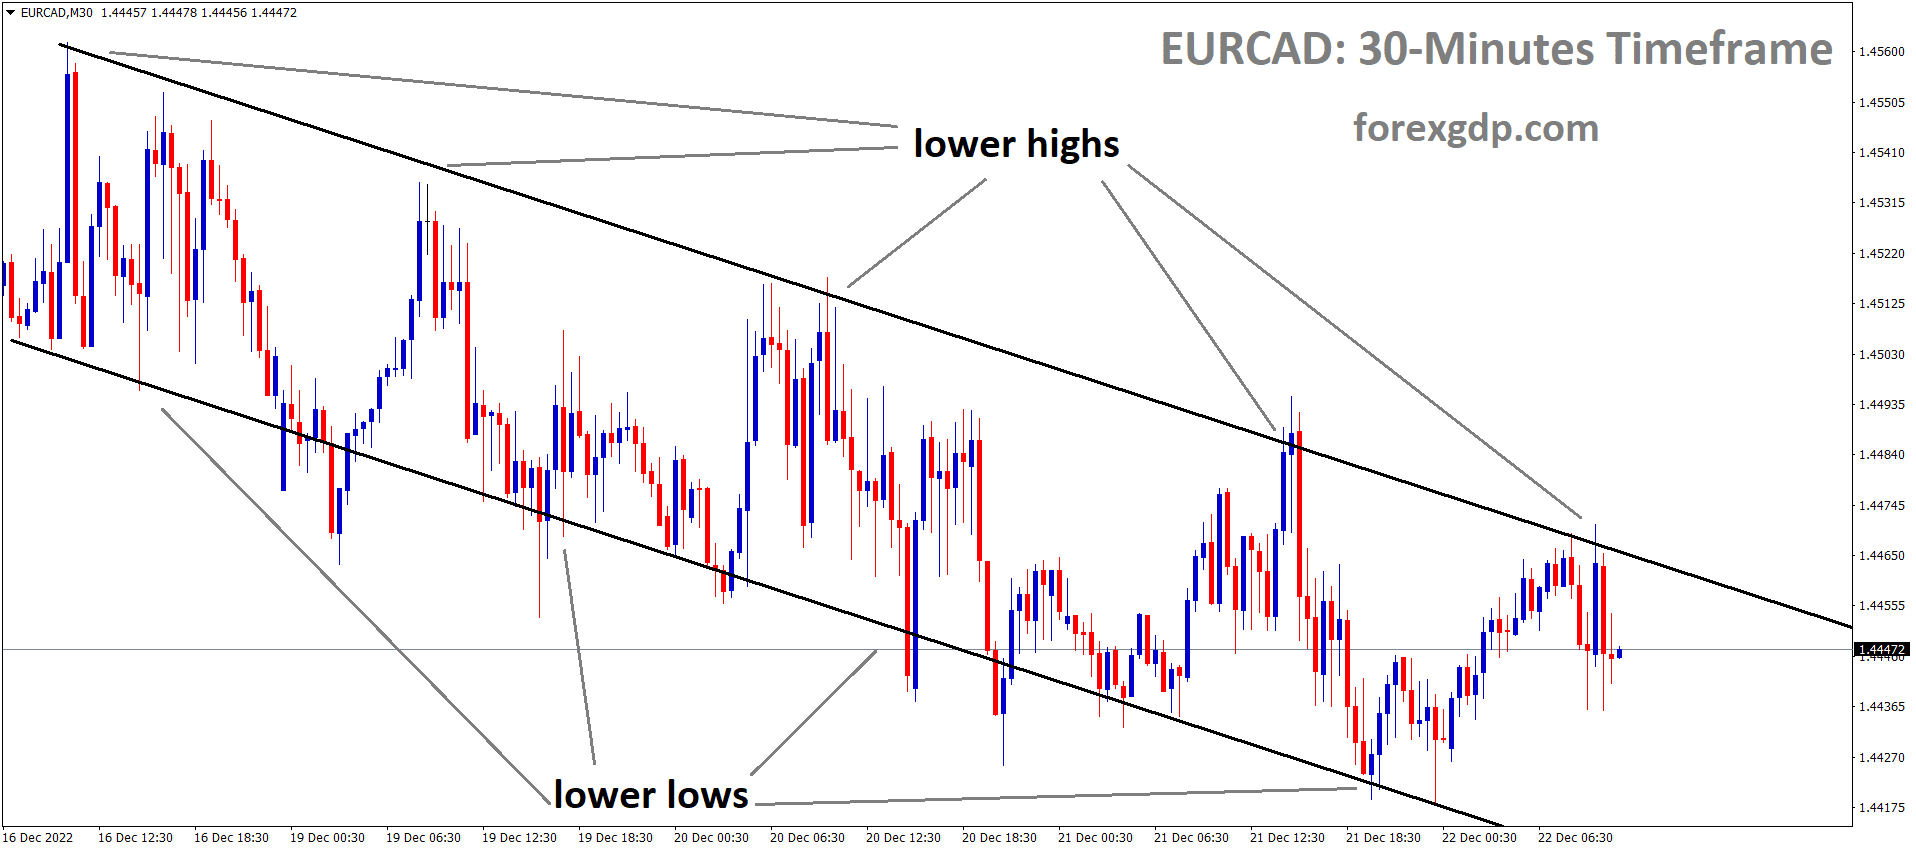 EURCAD is moving in the Descending channel and the market has fallen from the lower high area of the channel 1